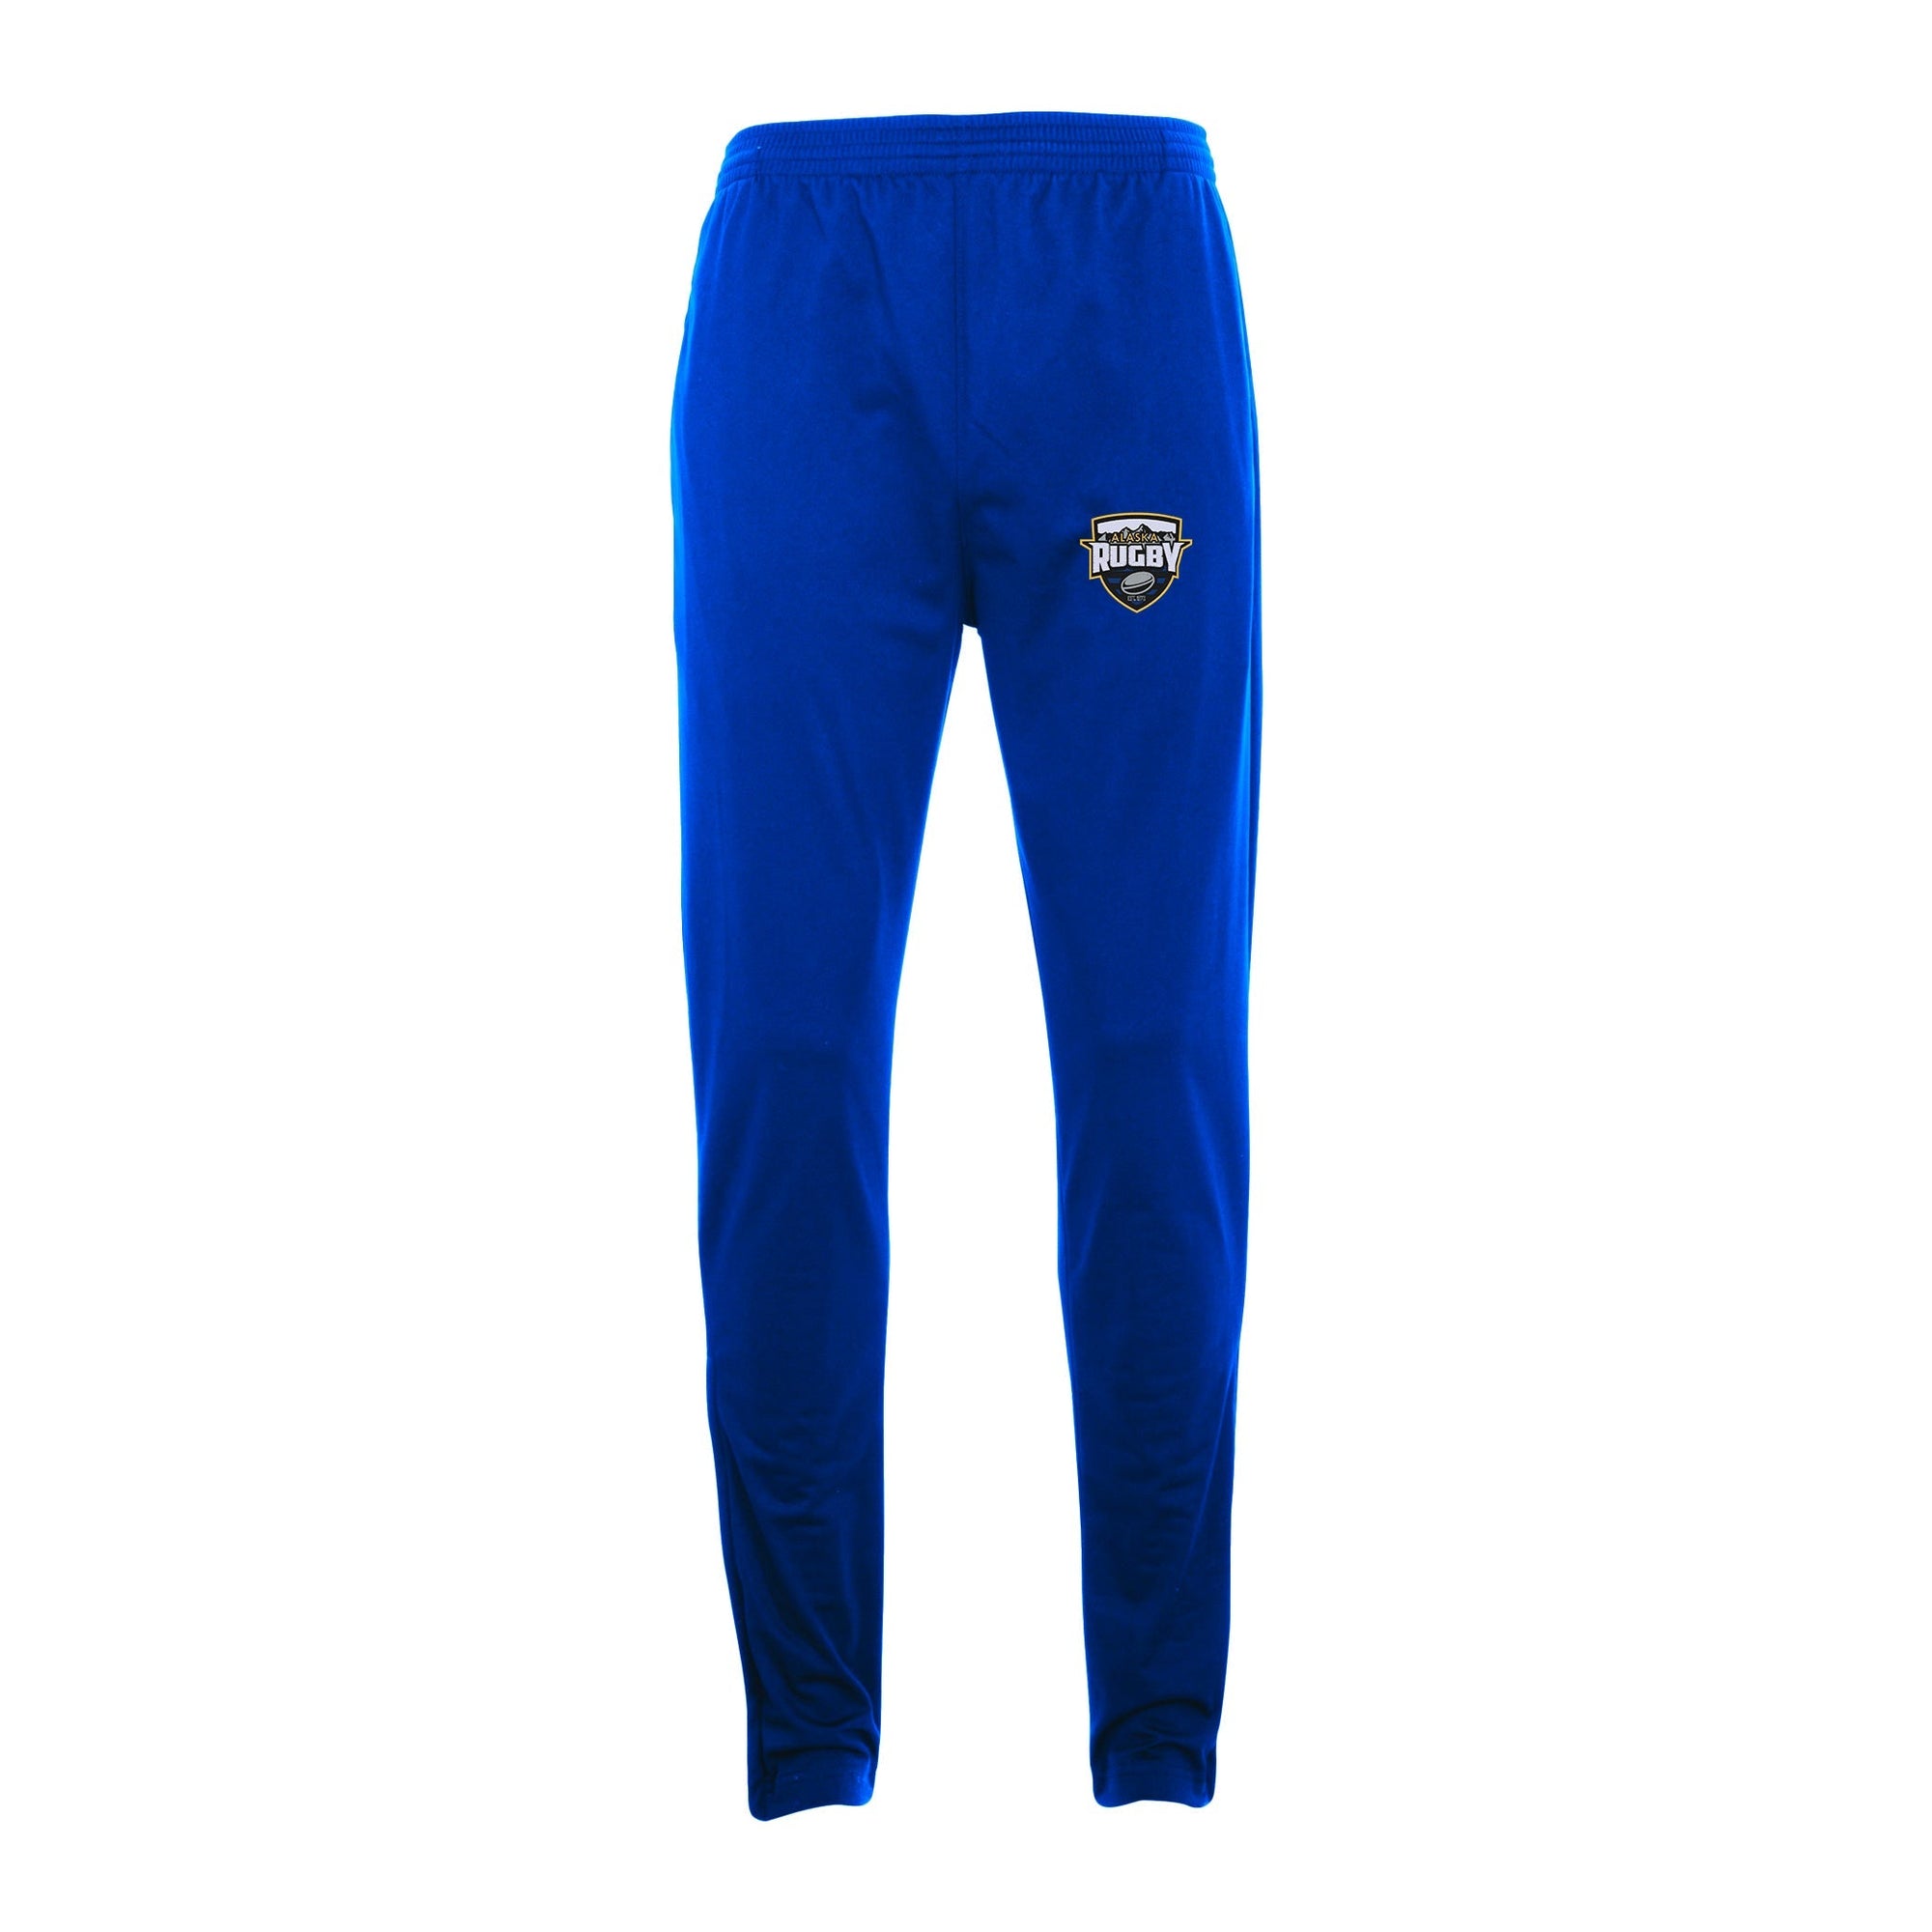 Rugby Imports Alaska Rugby Unisex Tapered Leg Pant